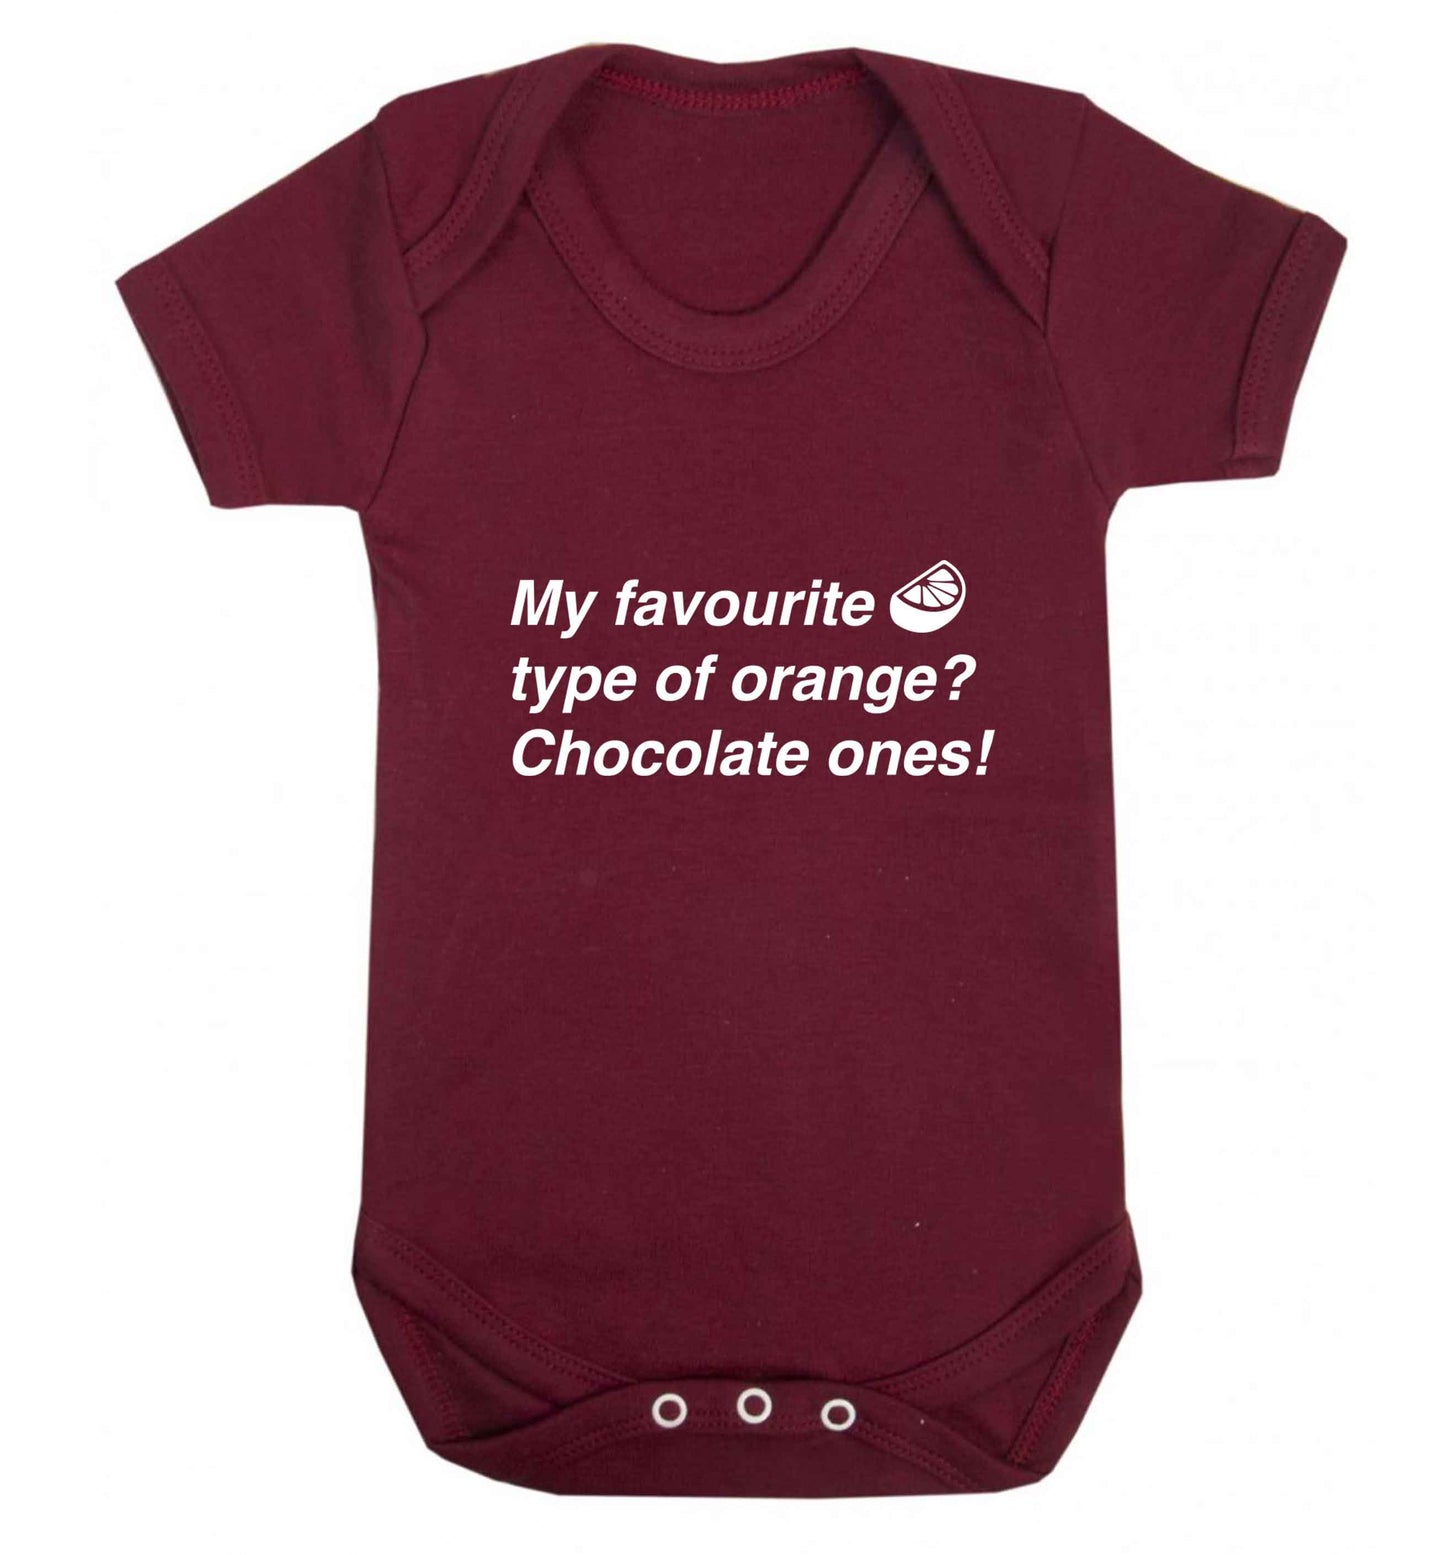 funny gift for a chocaholic! My favourite kind of oranges? Chocolate ones! baby vest maroon 18-24 months